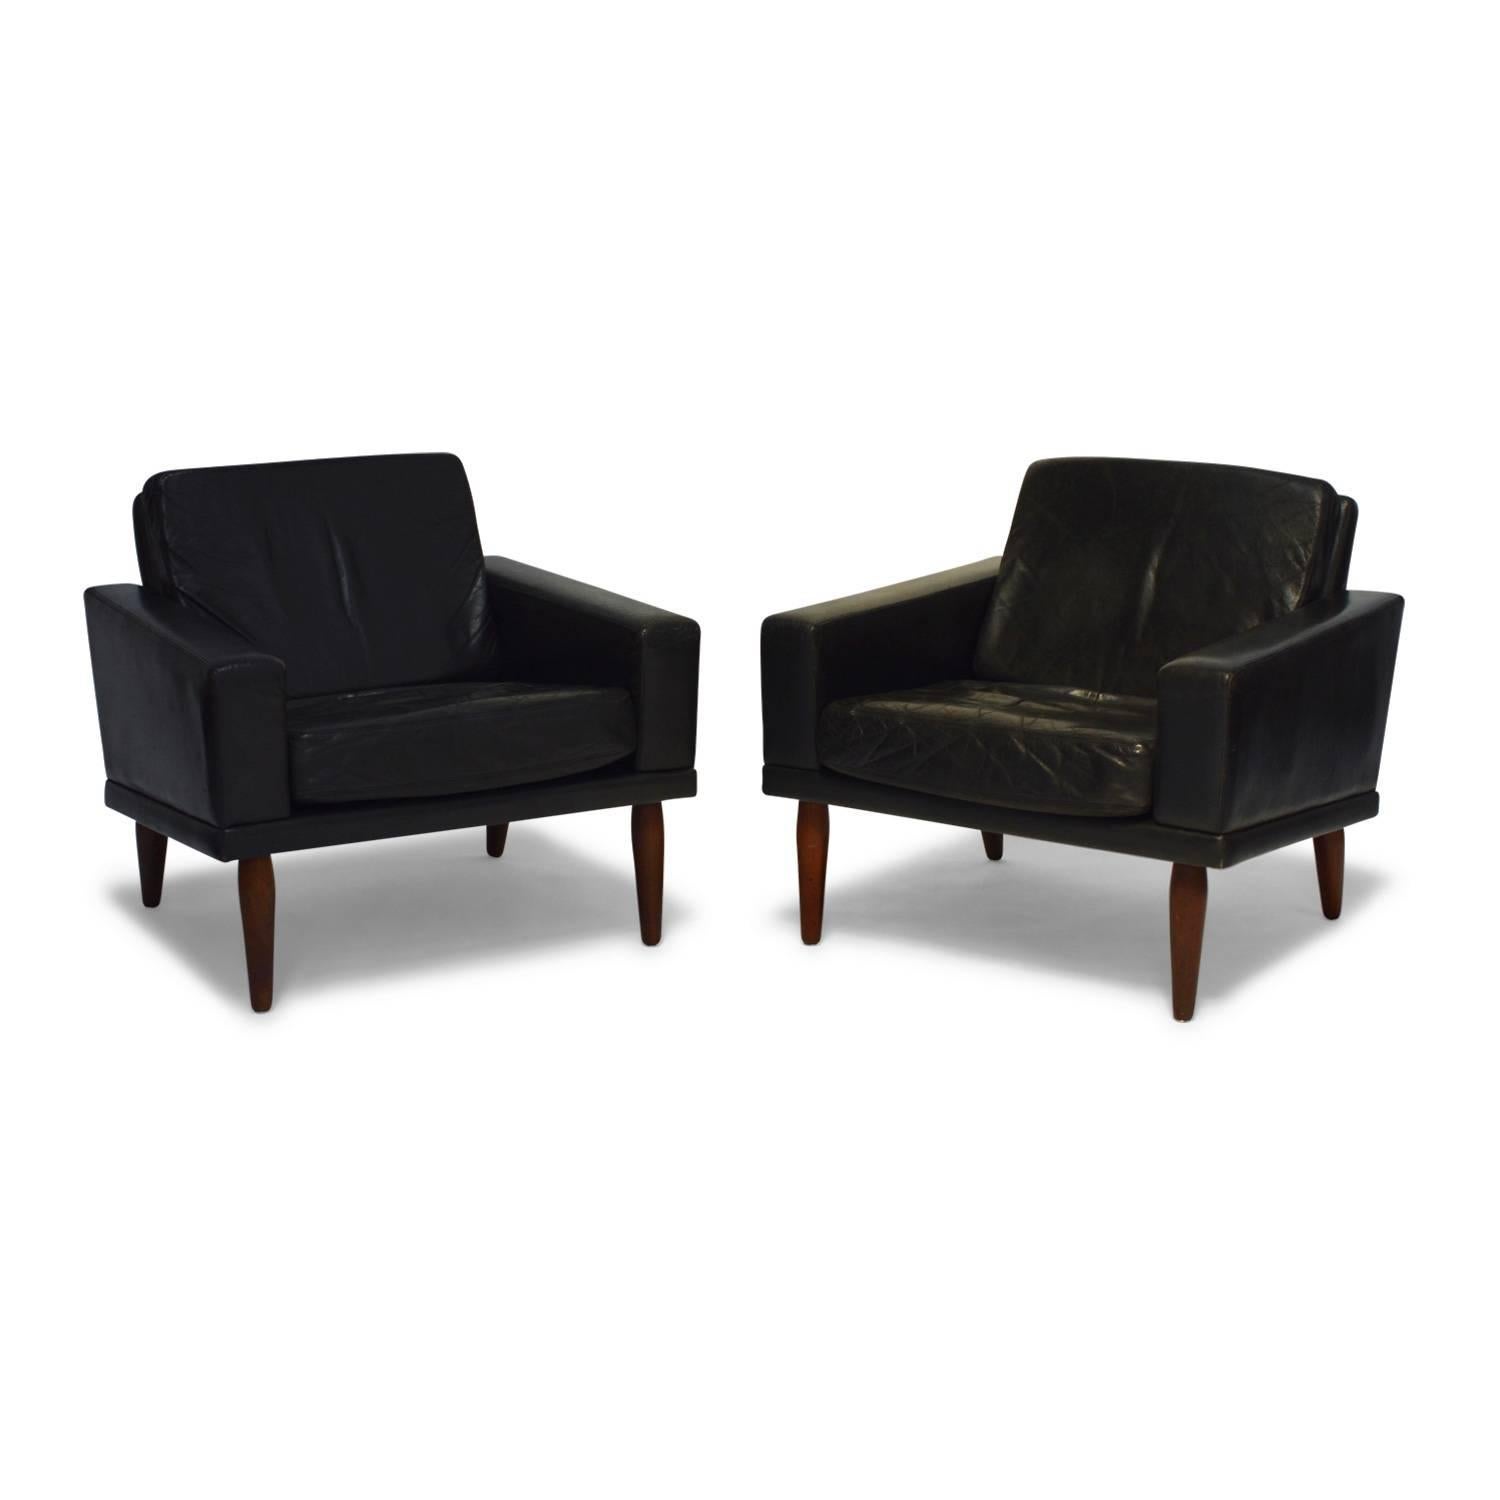 Scandinavian Modern Pair of Black Leather Lounge Chairs by Bovenkamp, 1960s